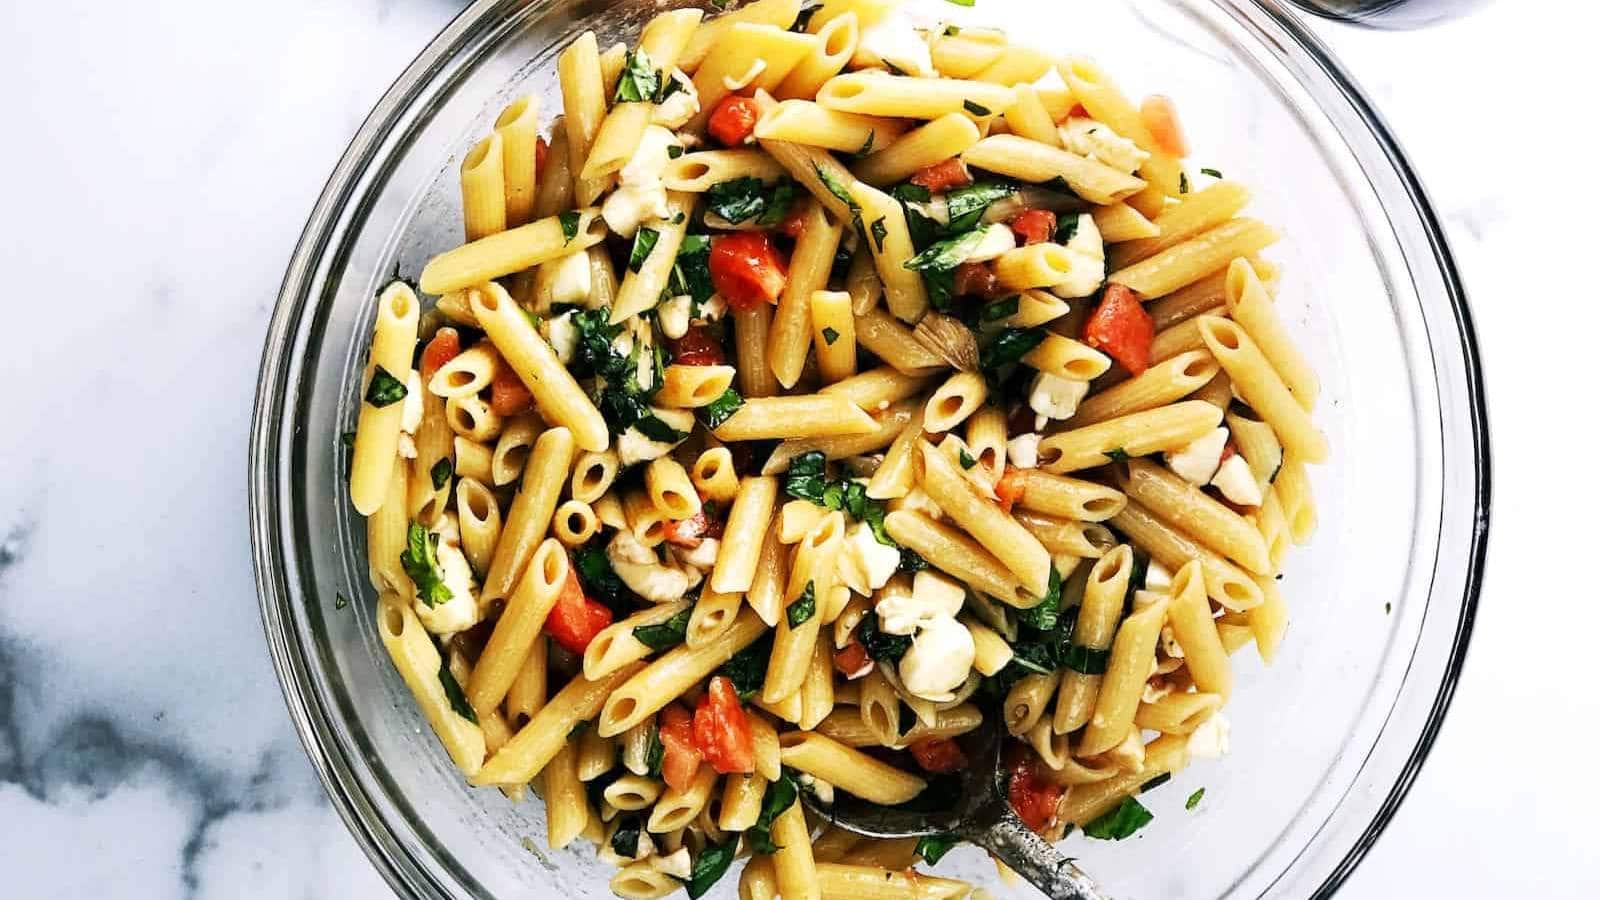 Italian Pasta Salad With Balsamic recipe by Keeping It Simple.